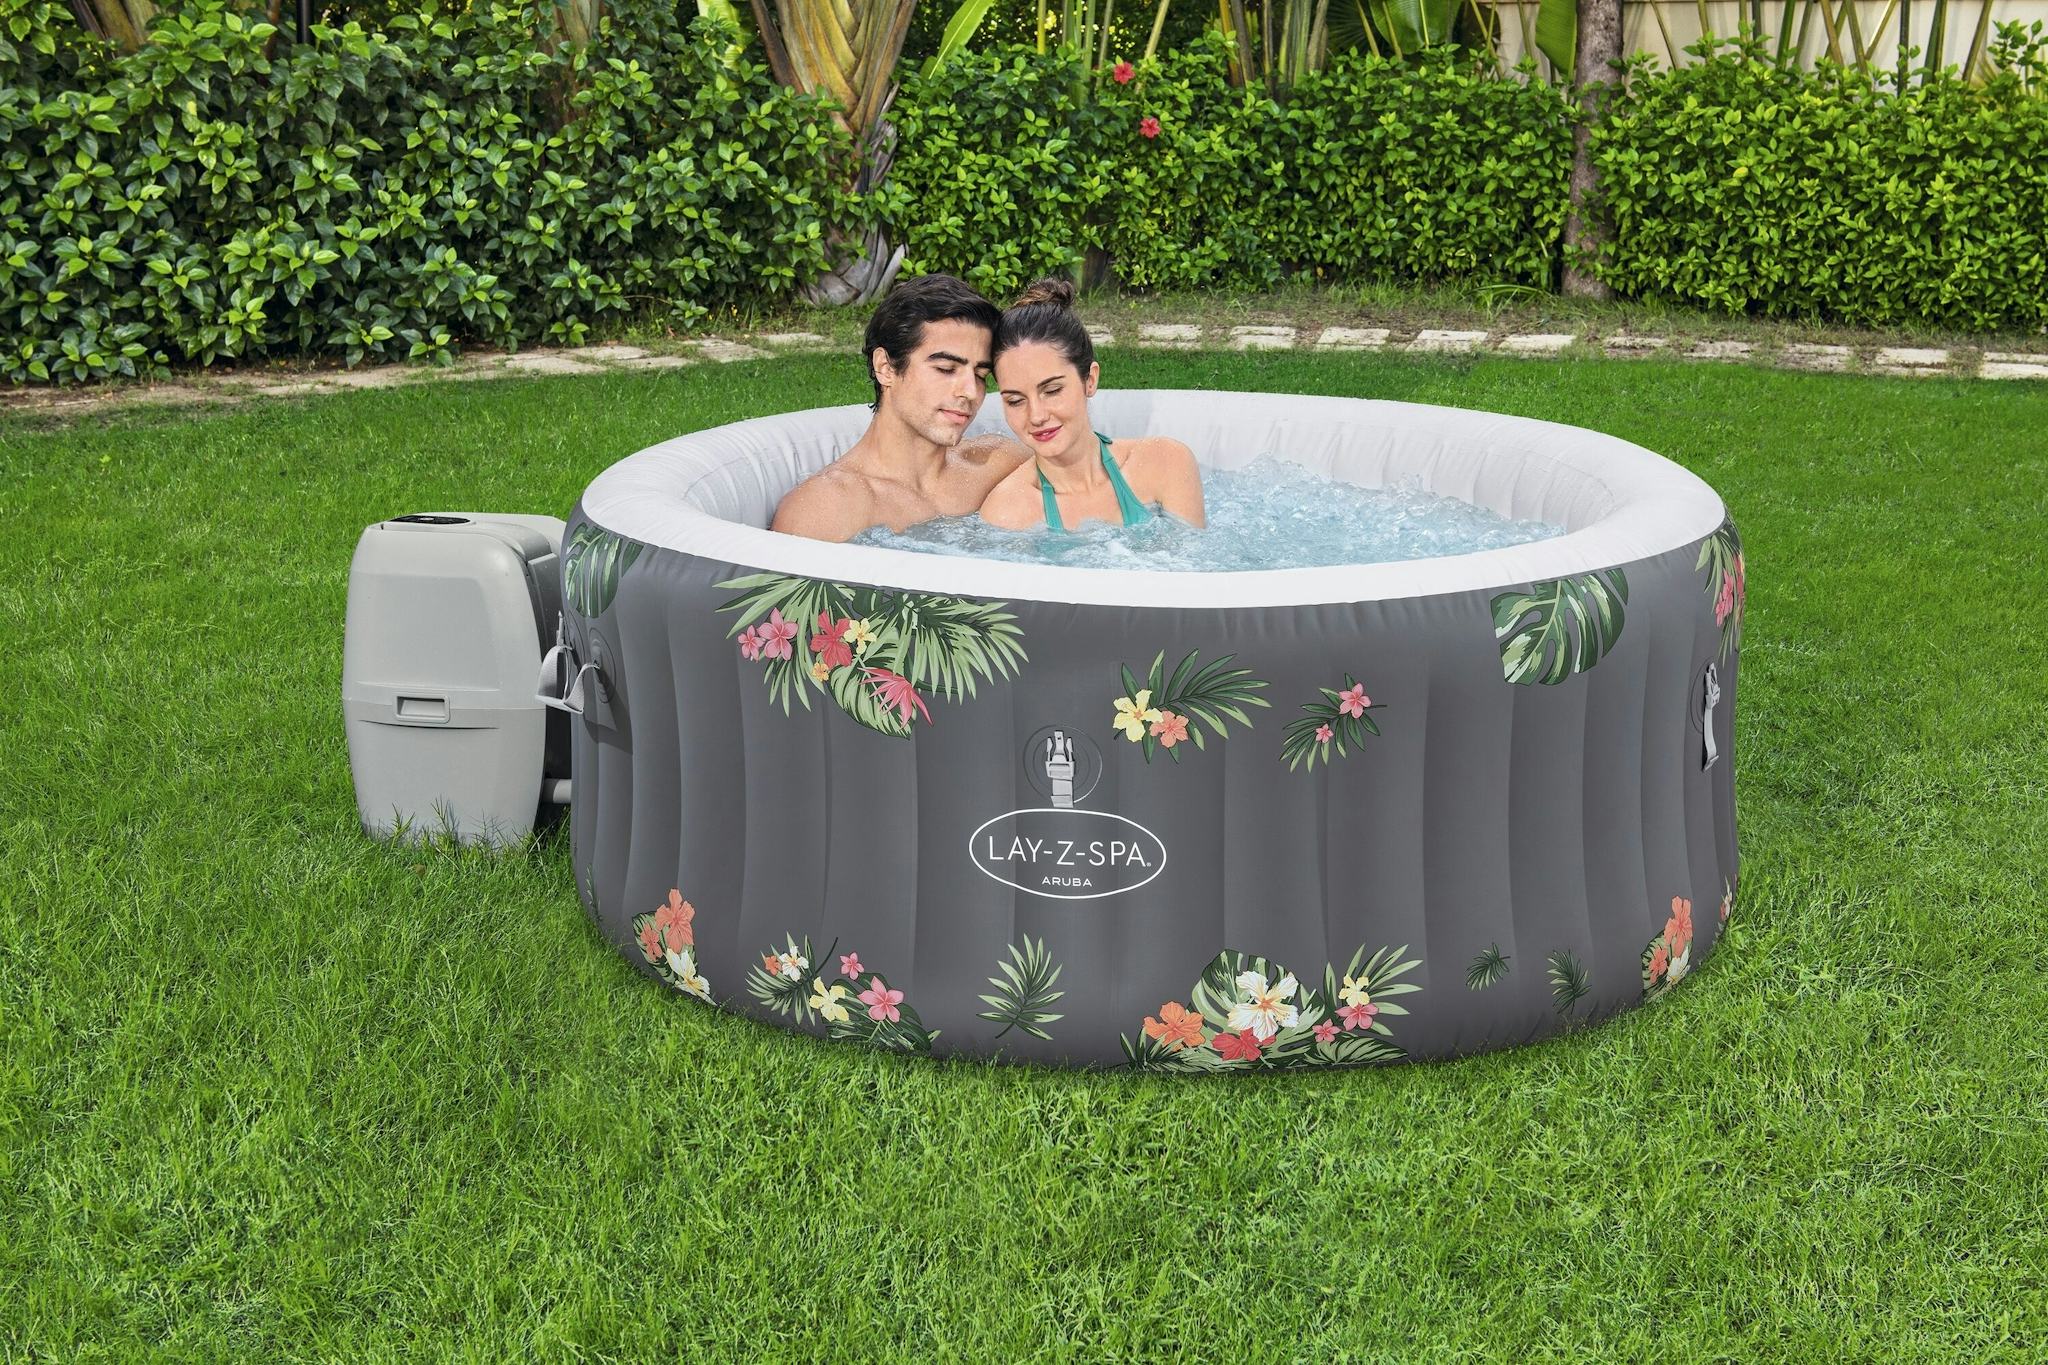 Spas Gonflables Spa gonflable rond Lay-Z-Spa Aruba Airjet™ 2 - 3 personnes Bestway 31